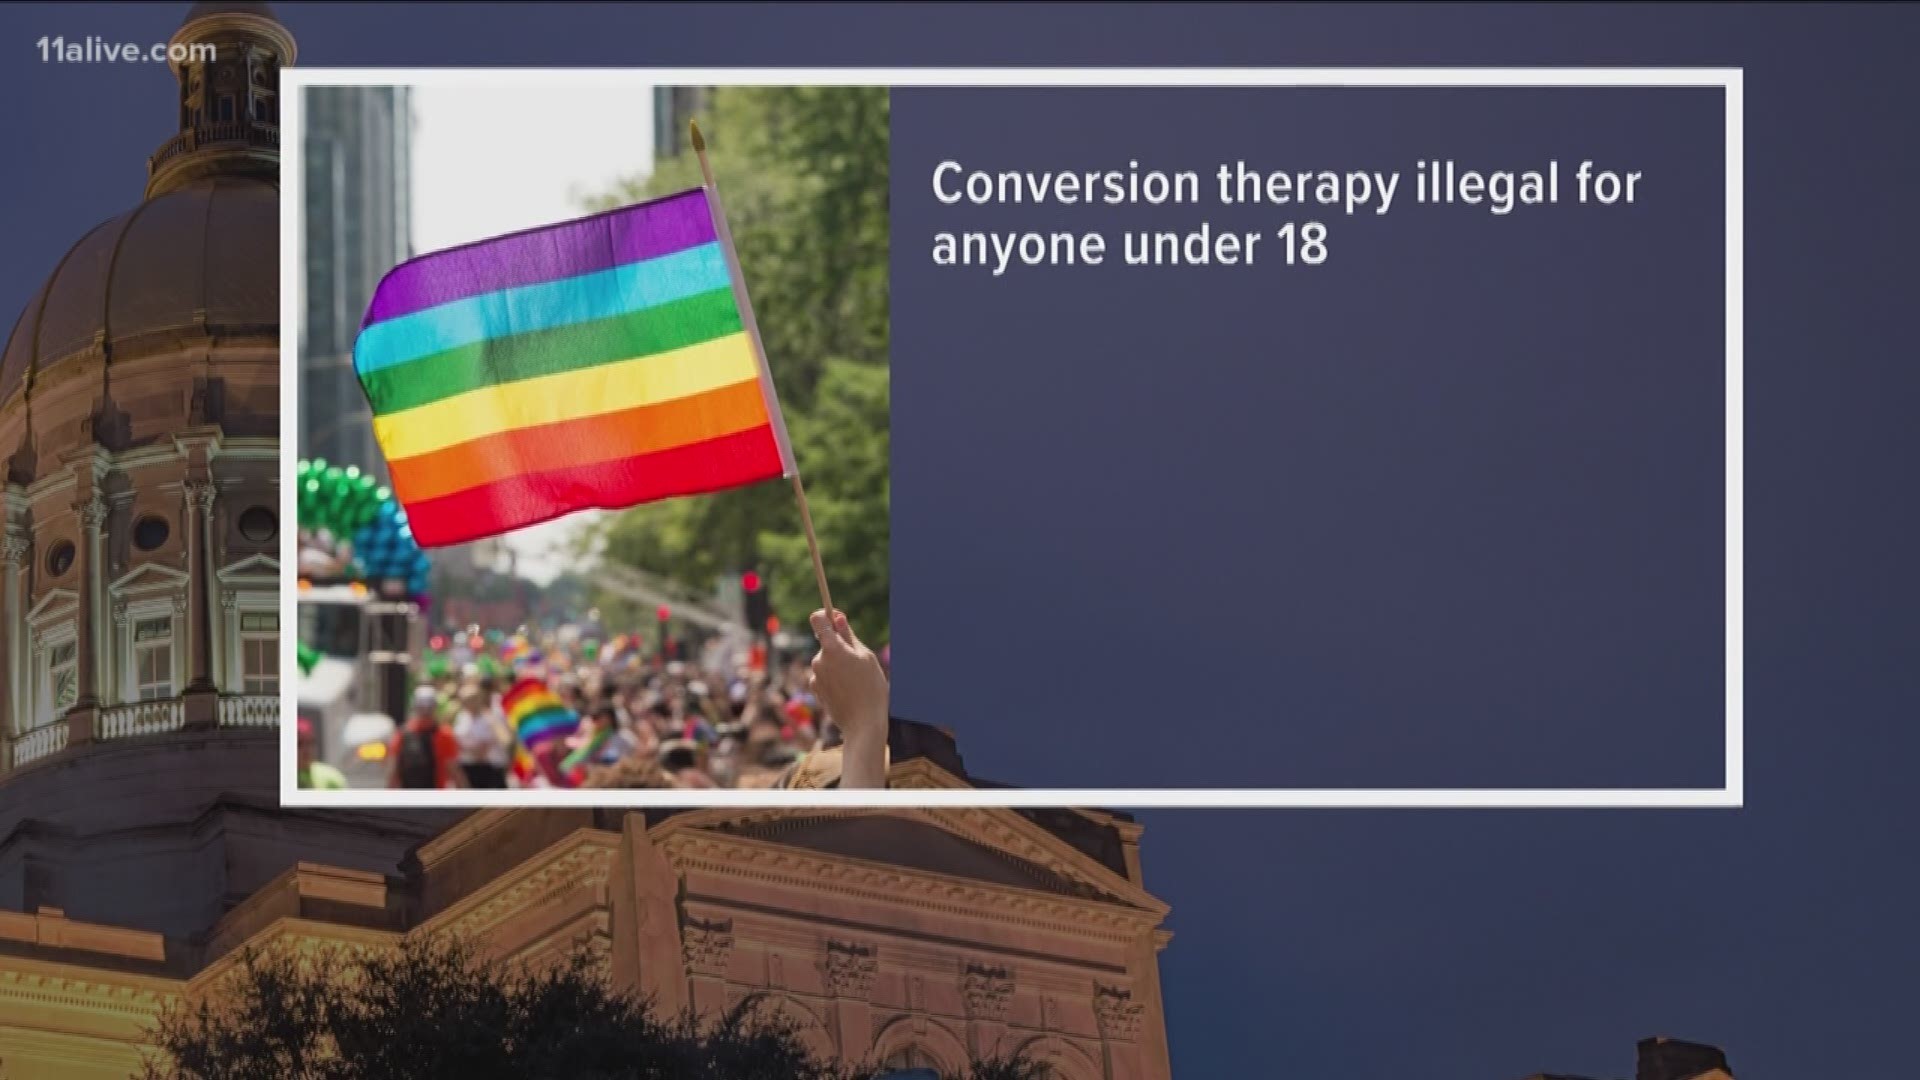 Doctors say treatment for LGBT folks is unethical and is even discredited.